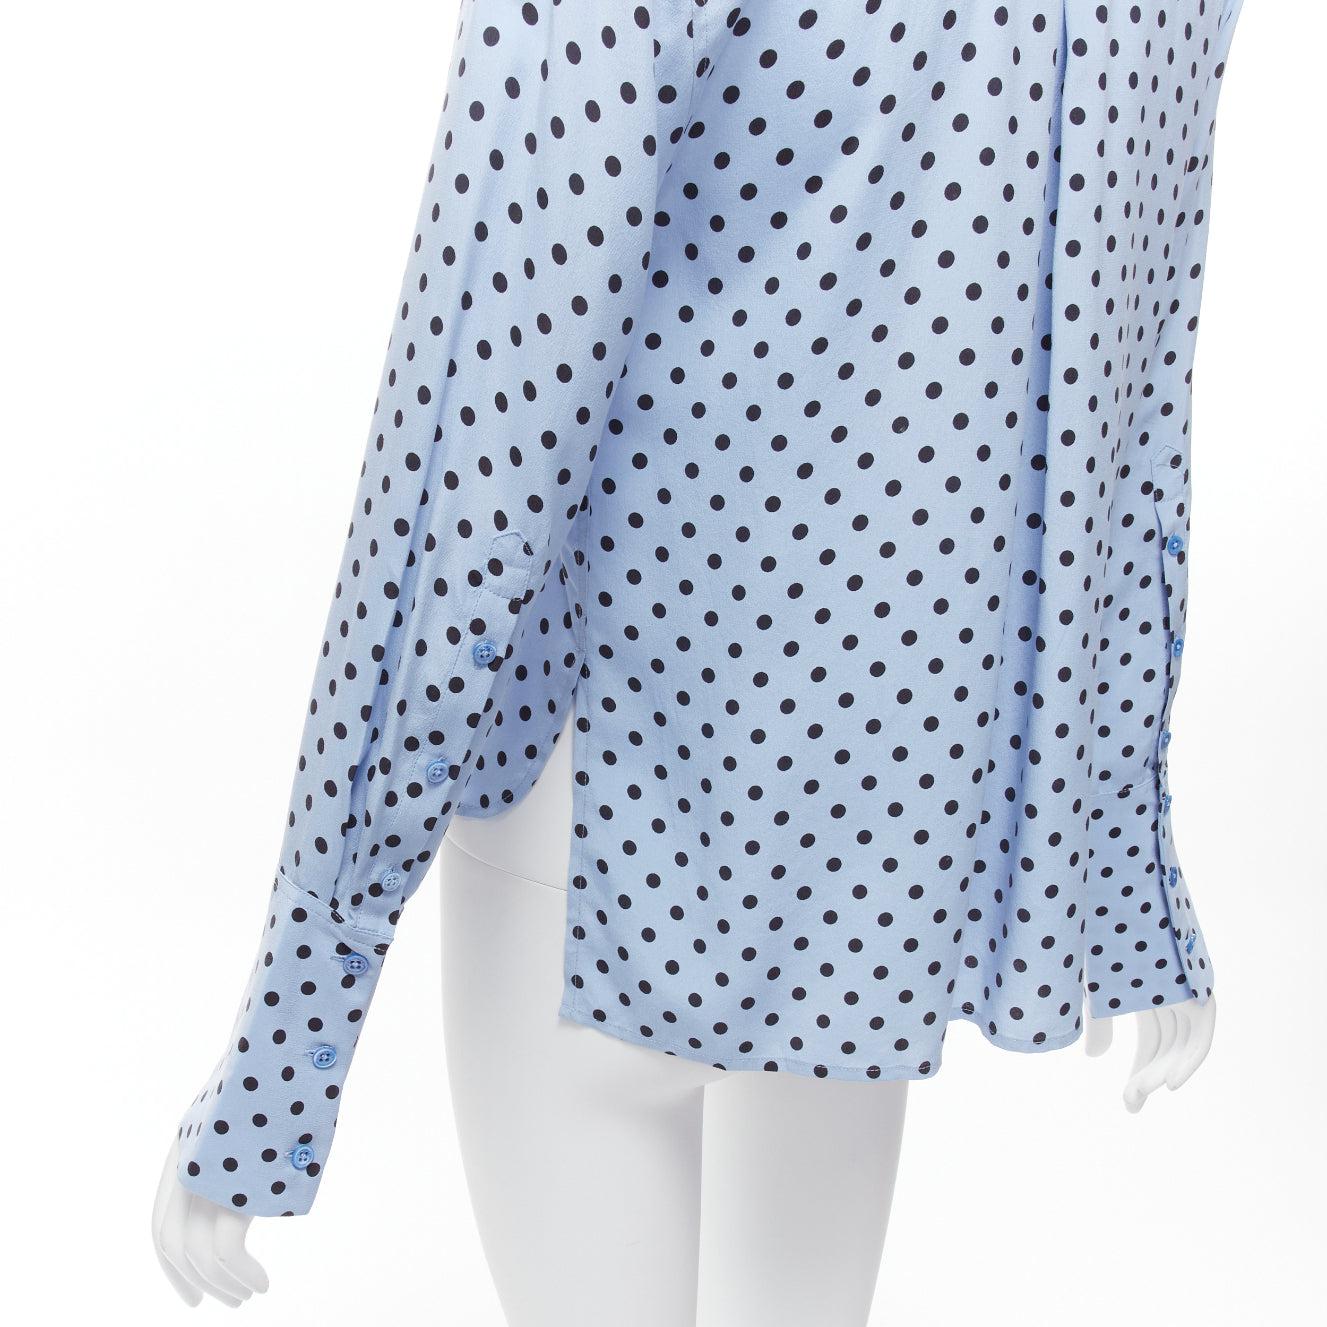 EQUIPMENT 100% silk blue black polka dot long sleeve short shirt XS
Reference: SNKO/A00385
Brand: Equipment
Material: Silk
Color: Black, Blue
Pattern: Polka Dot
Closure: Button
Extra Details: Inverted pleat back.
Made in: